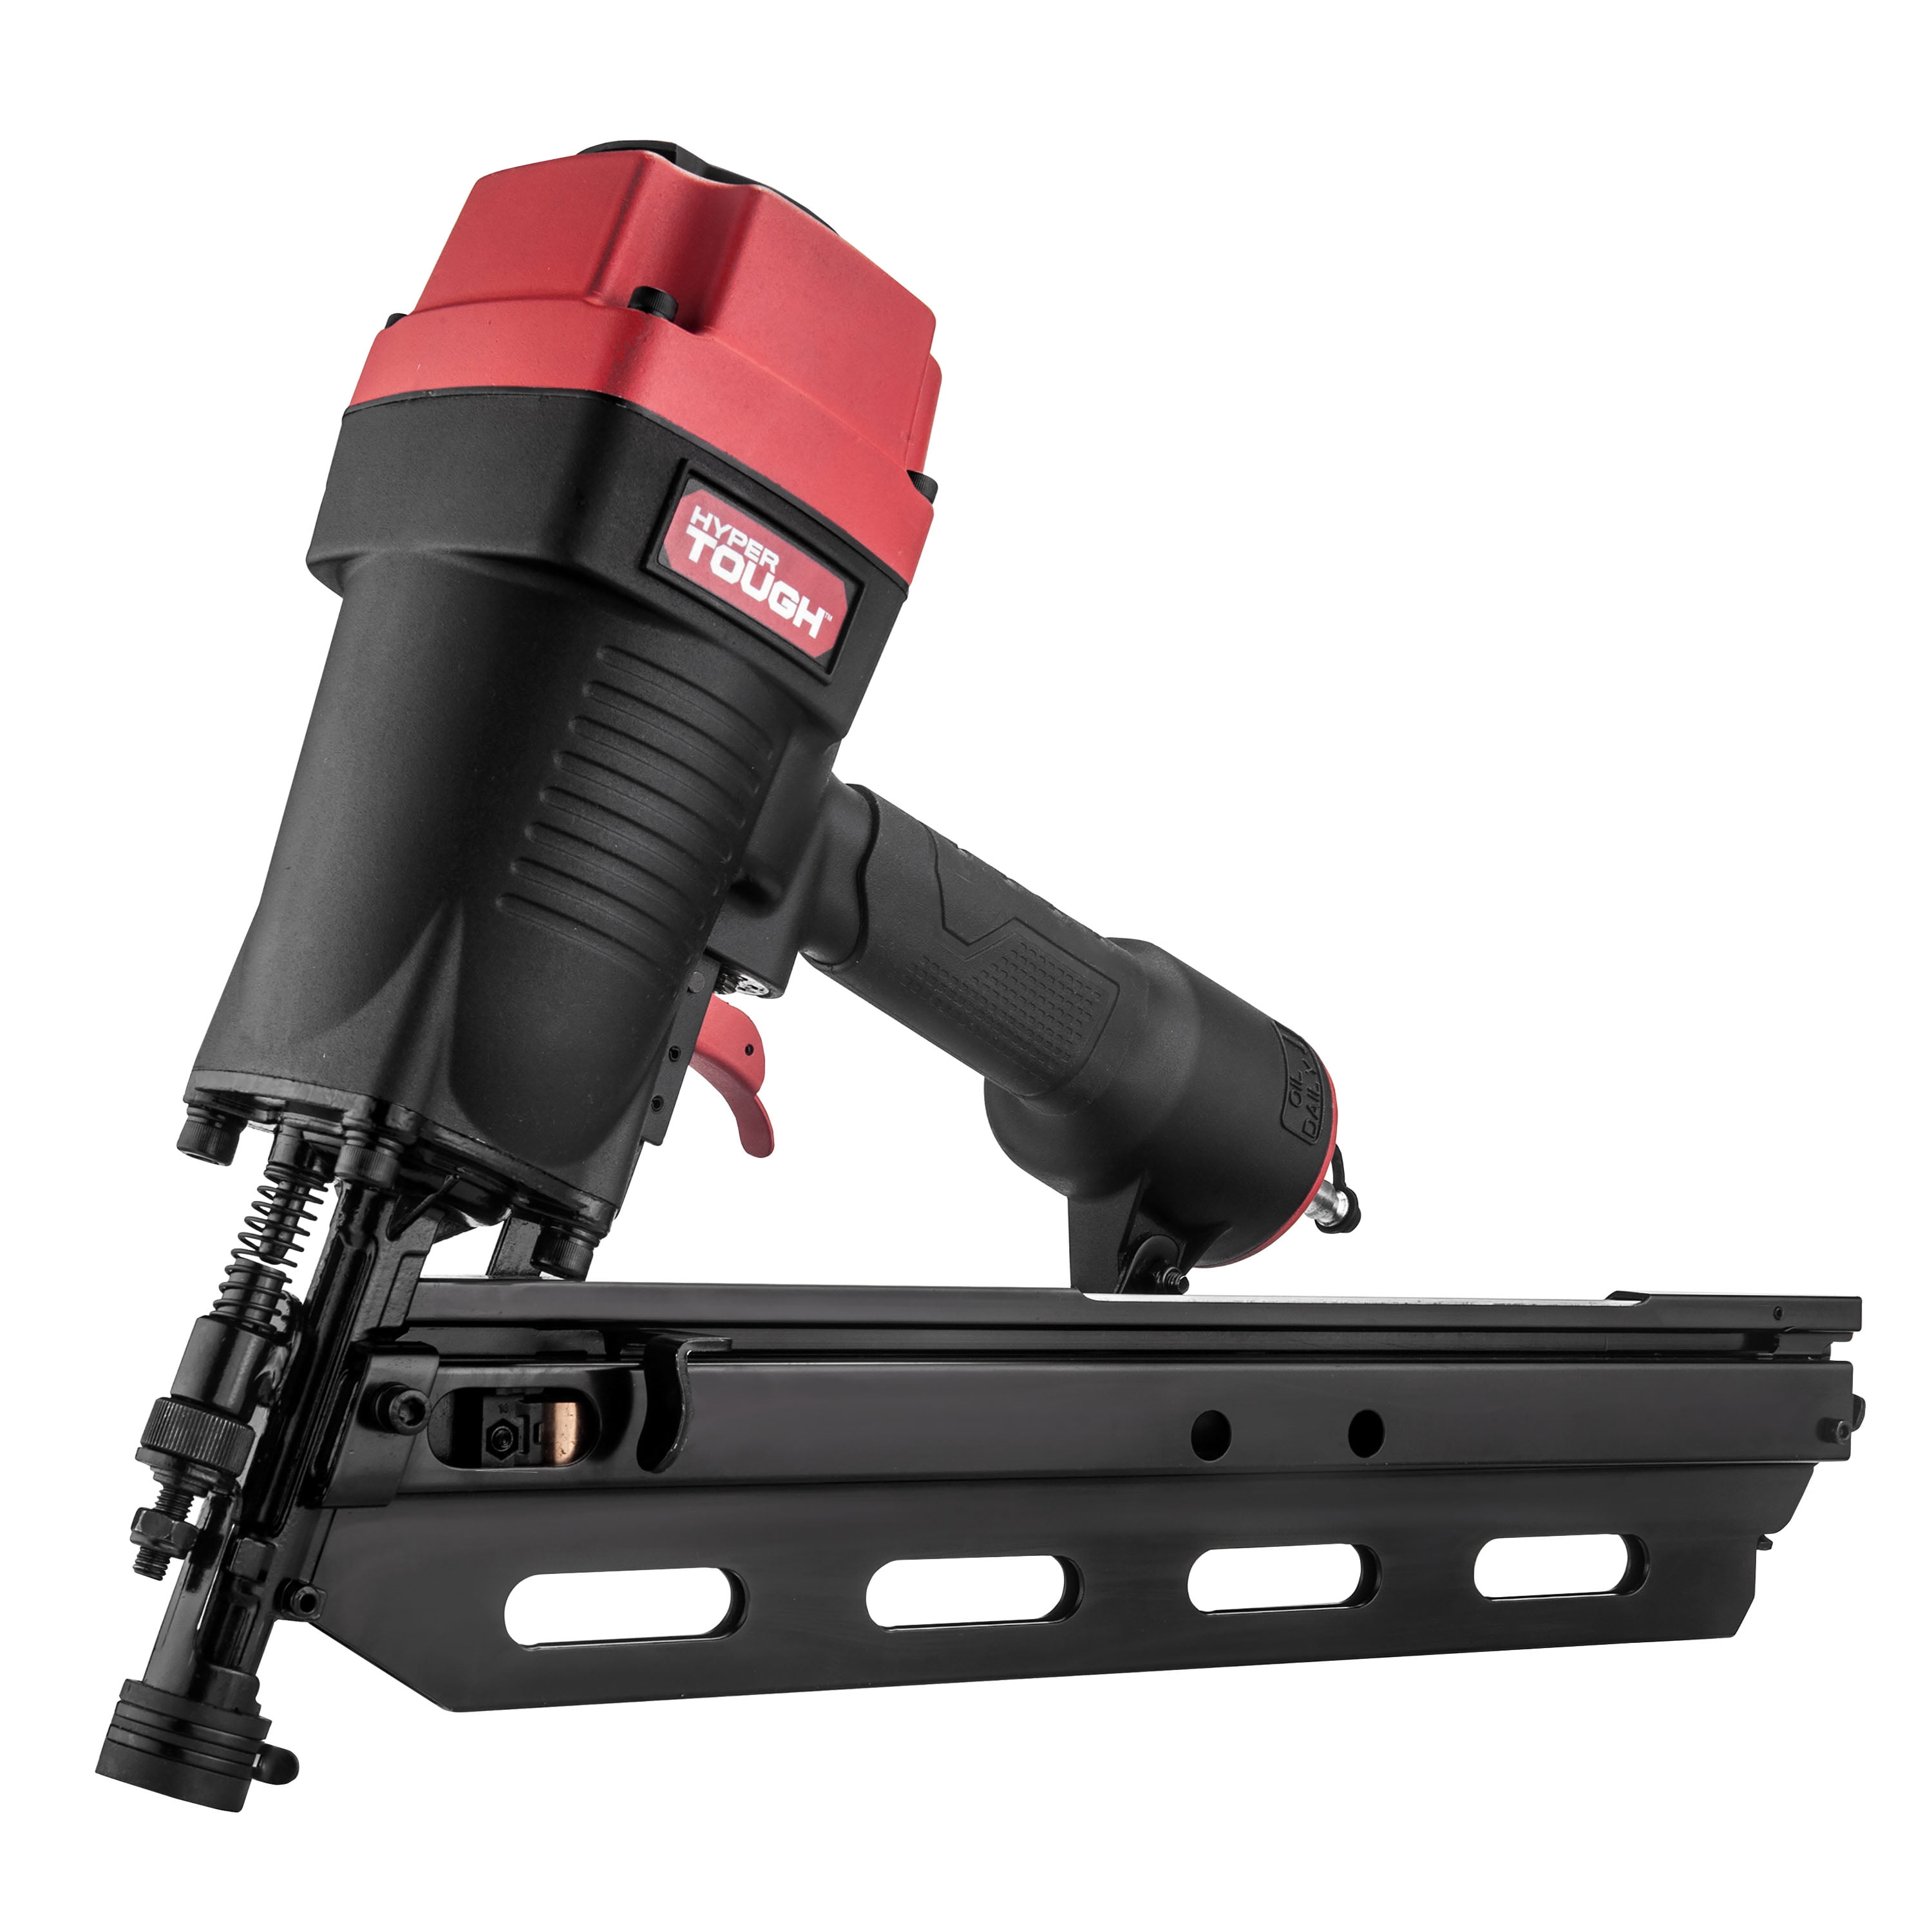 Bostitch Framing Nailer Review - F21PL2 - Pro Tool Reviews